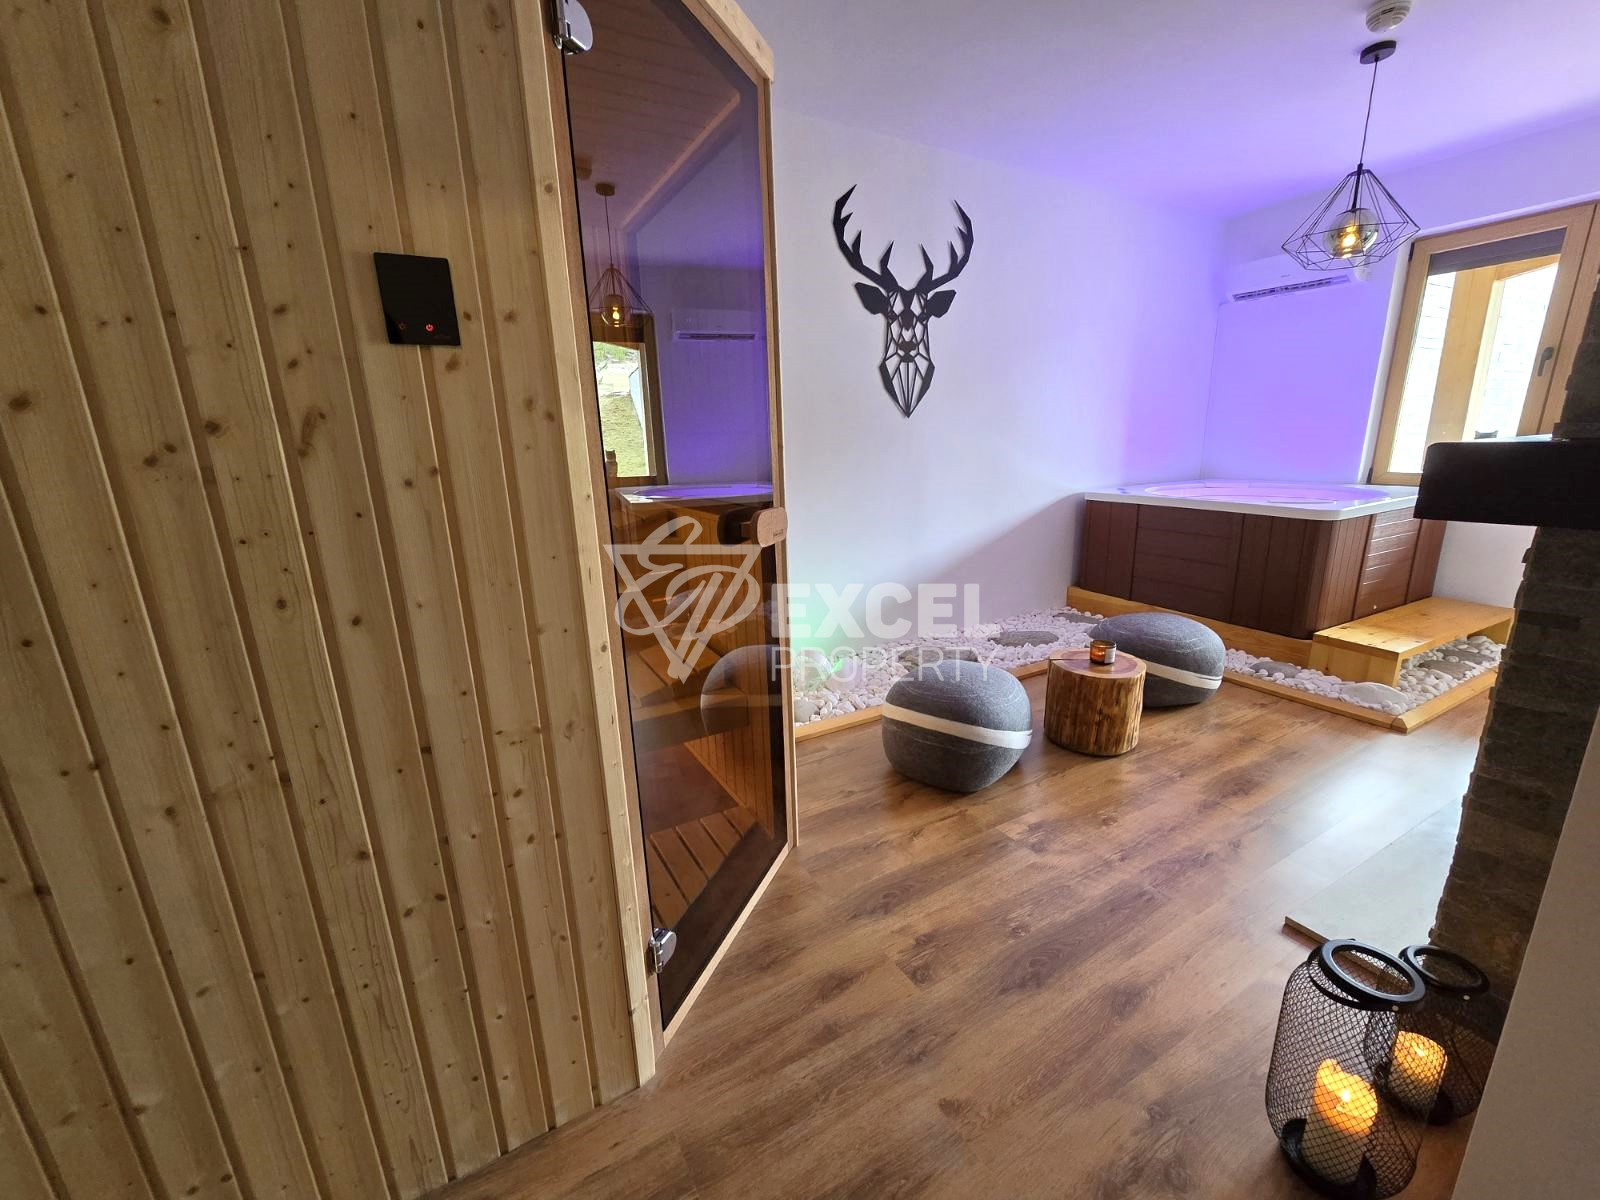 Luxury one-bedroom apartment with own SPA room with jacuzzi and sauna